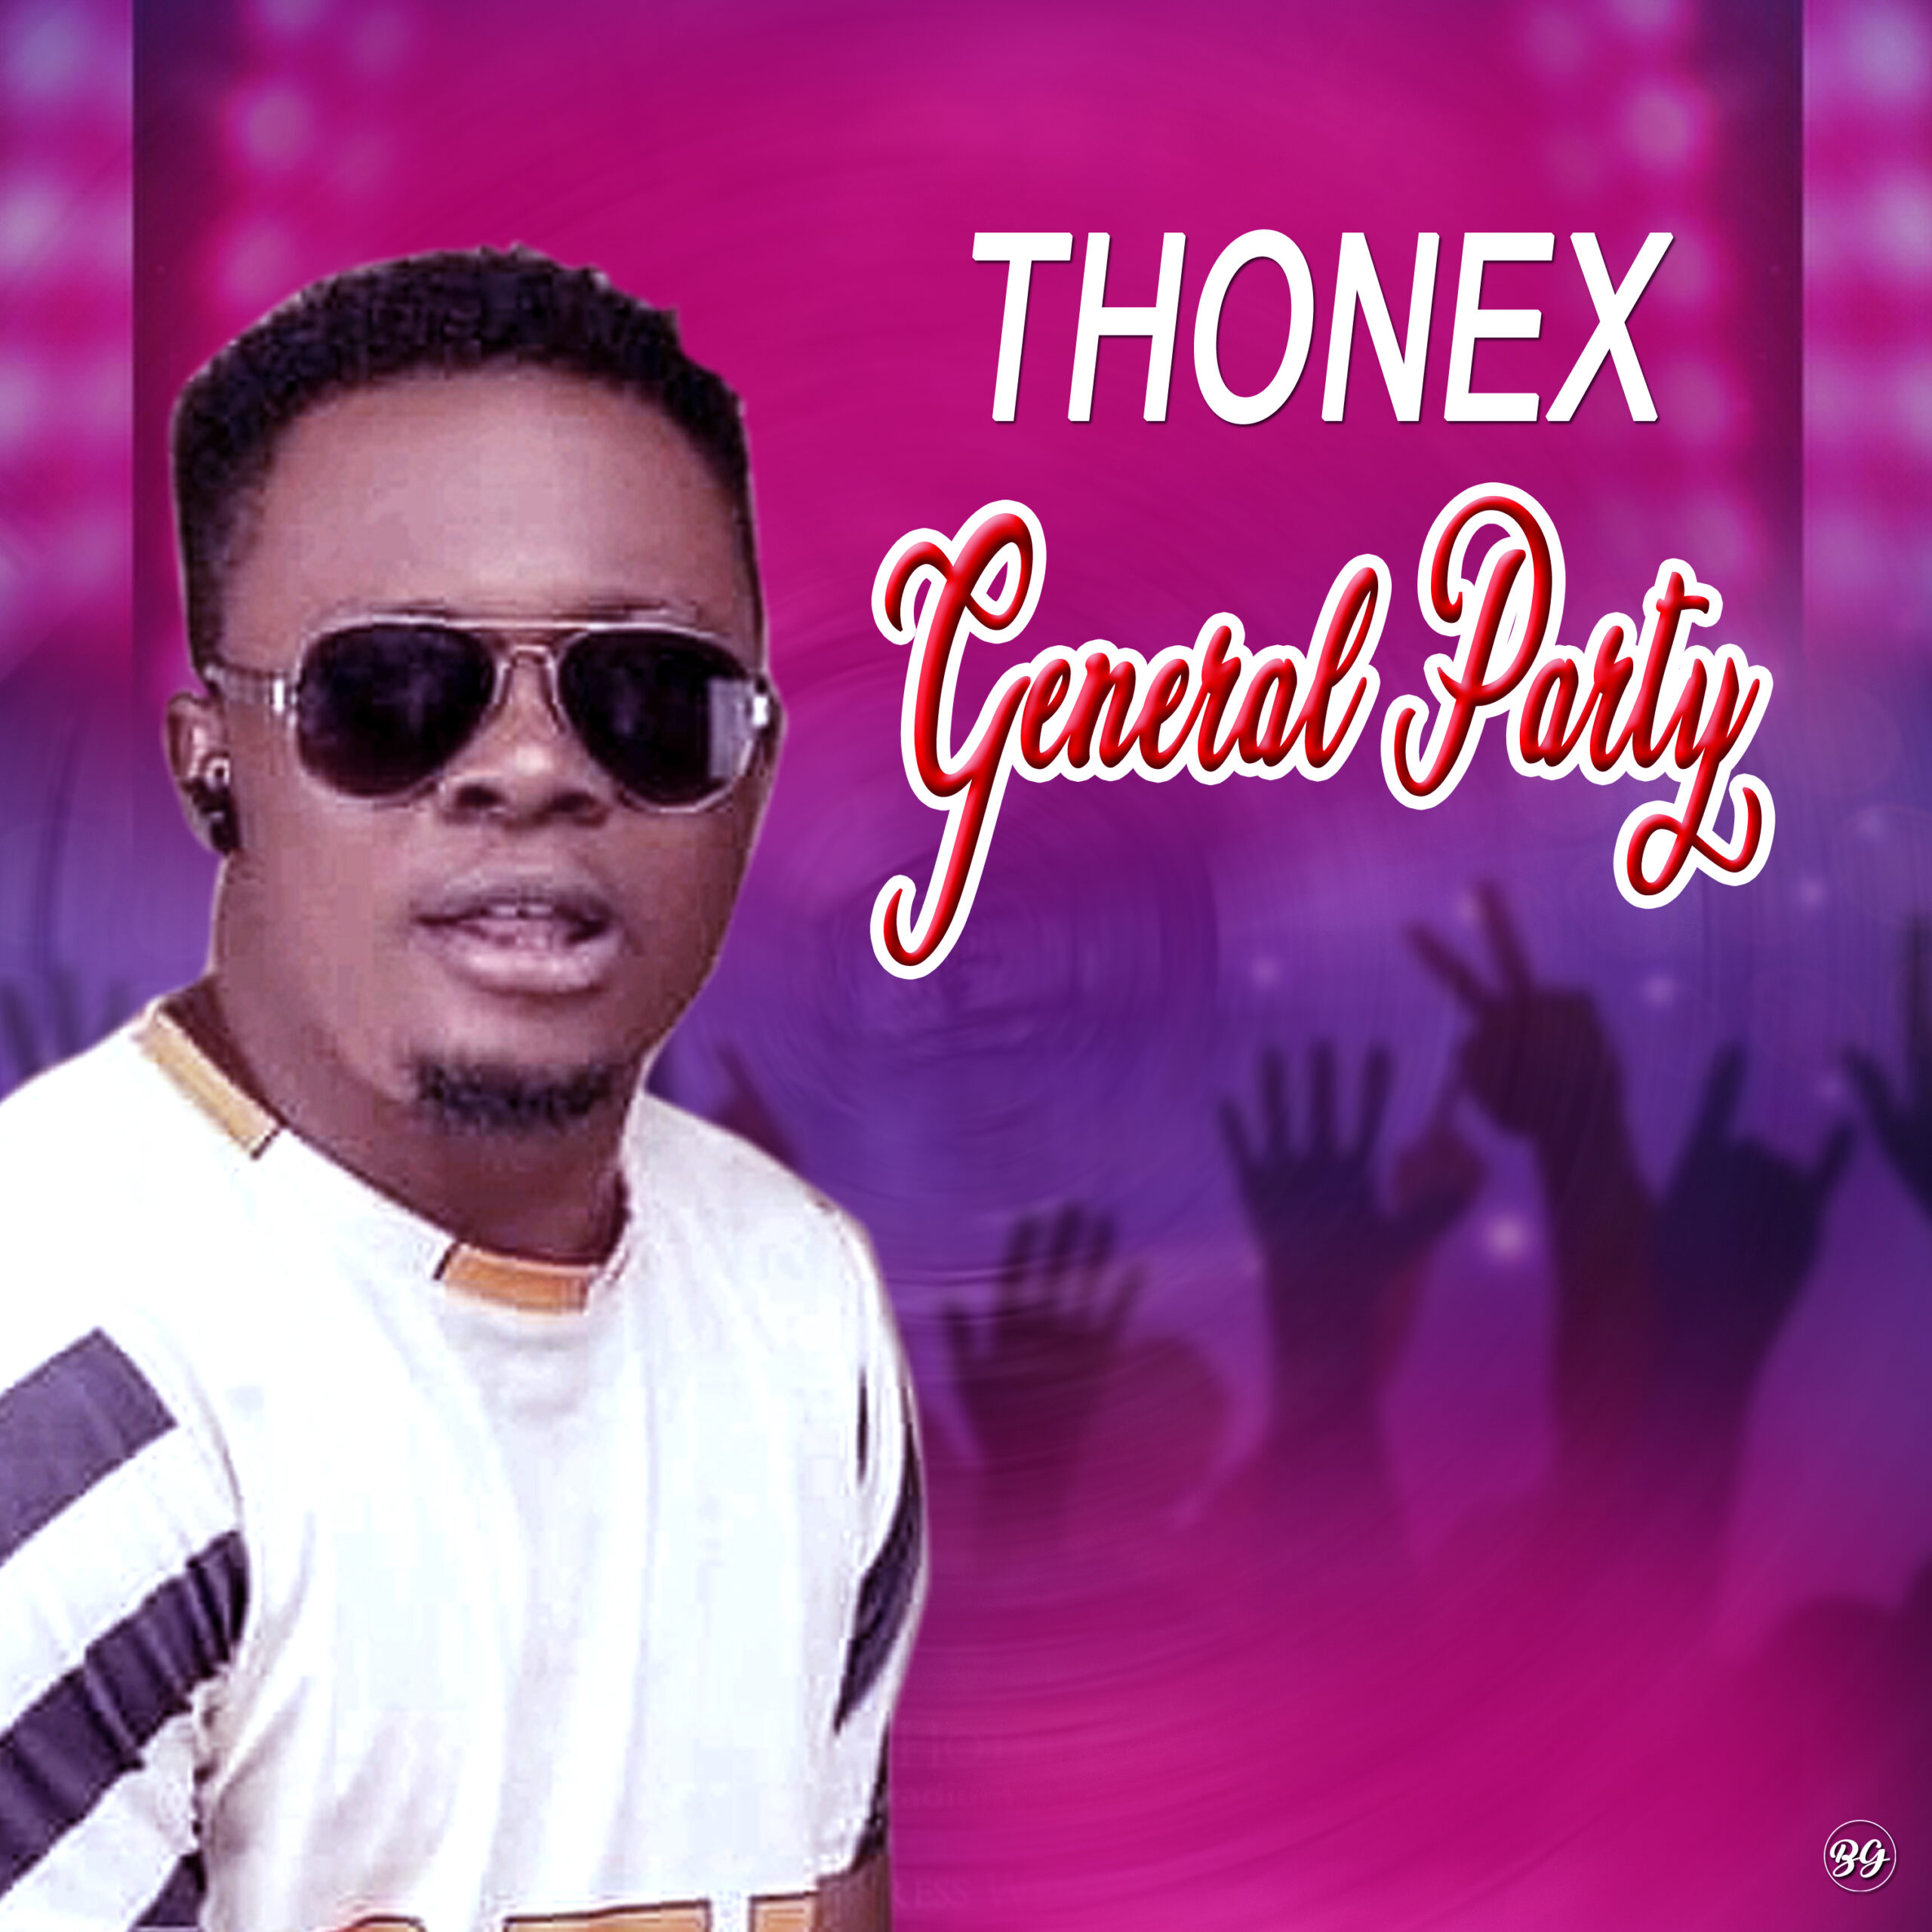 DOWNLOAD MUSIC: Thonex – General Party